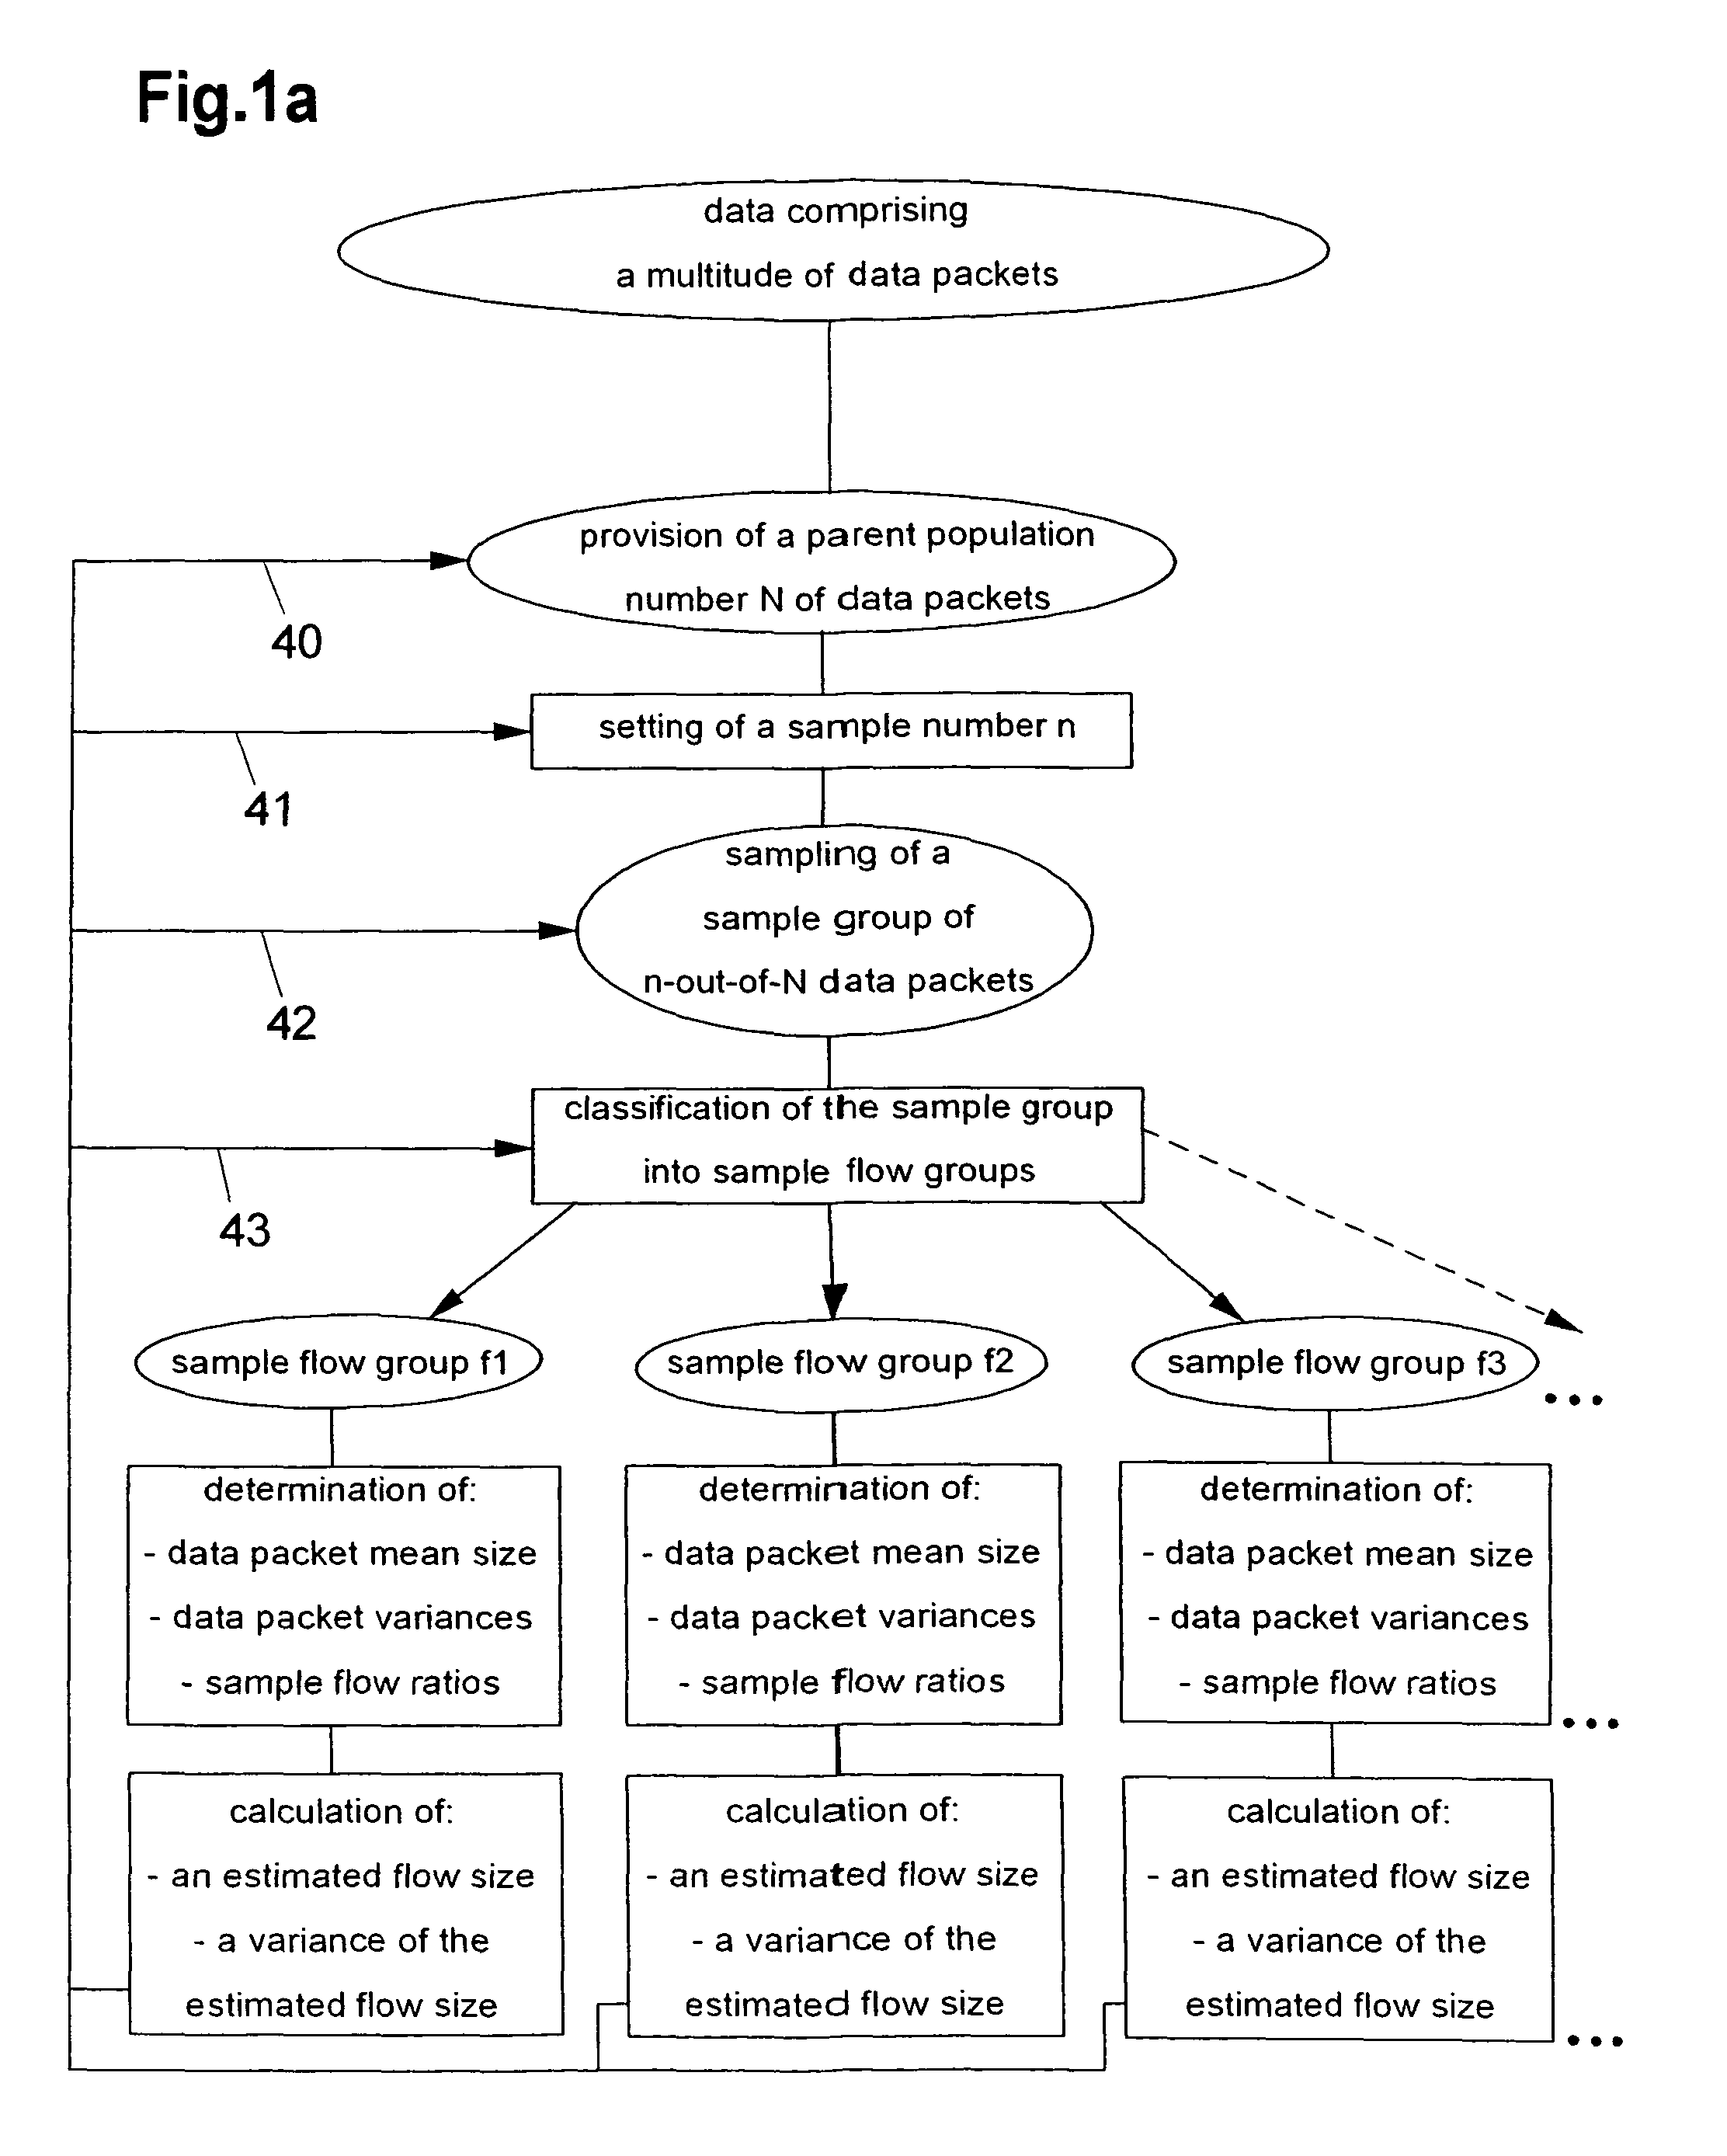 Method and monitoring system for sample-analysis of data comprising a multitute of data packets